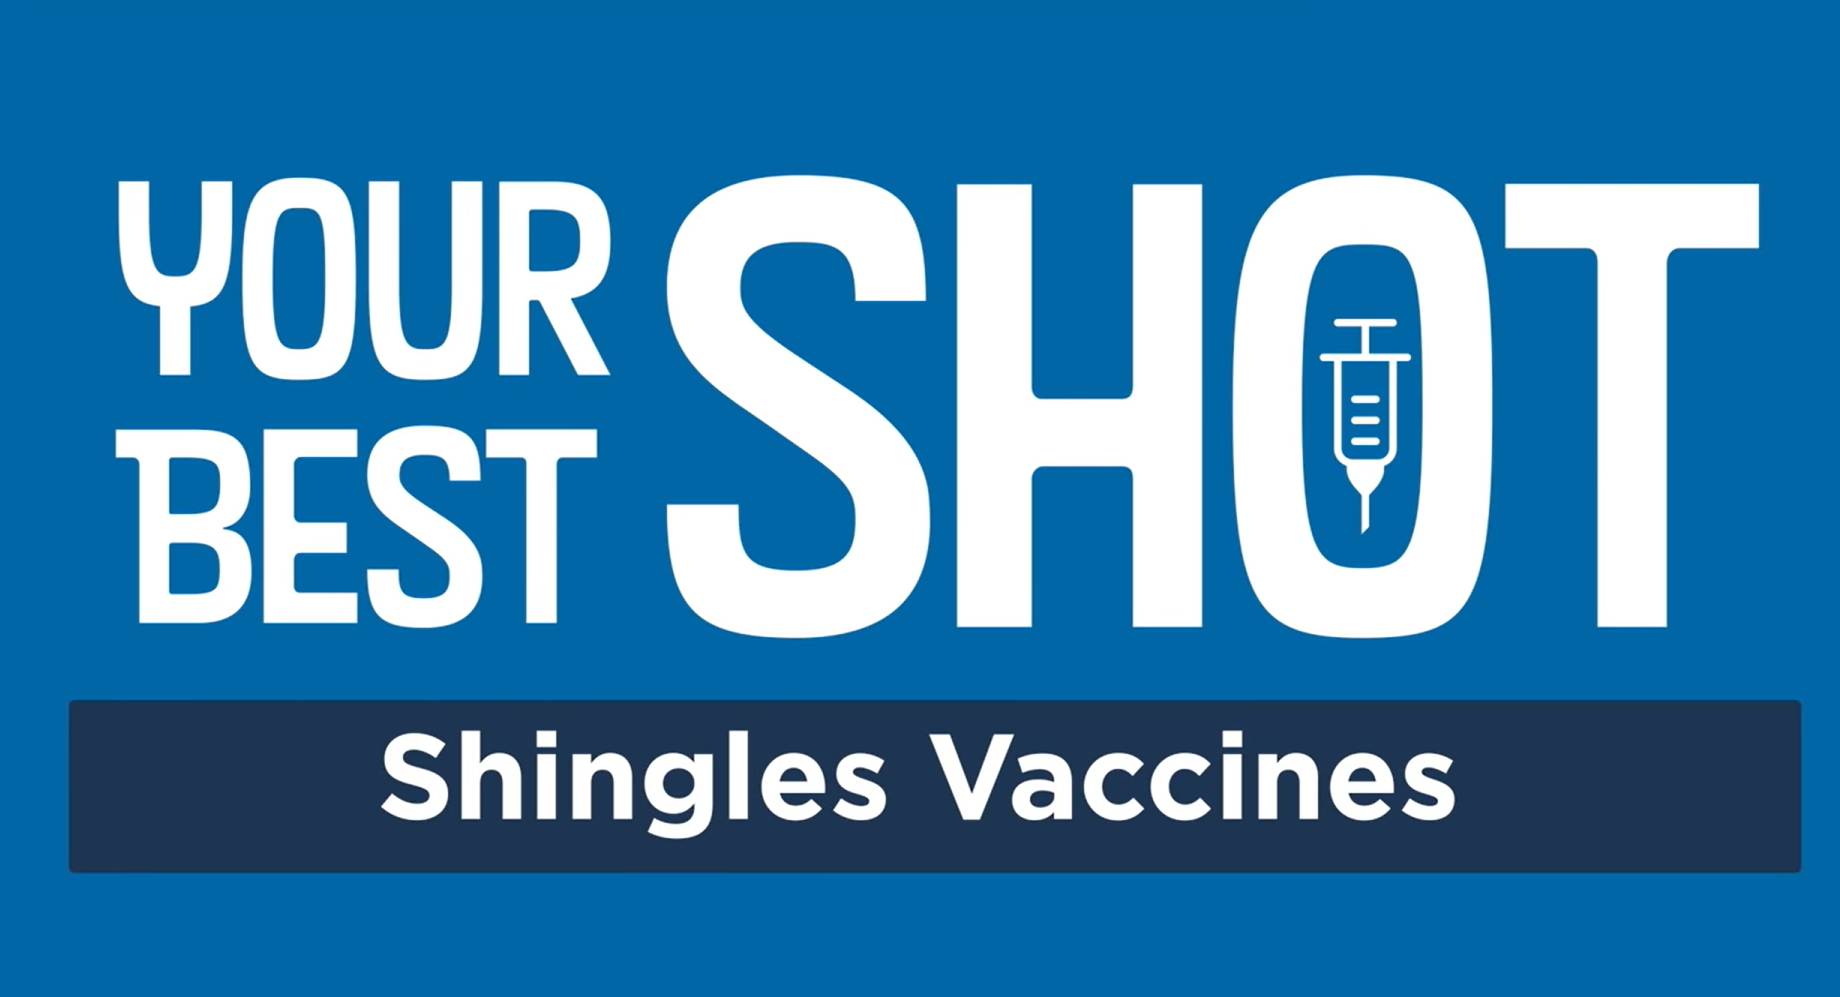 Text "Your best shot: Shingles vaccine" with an image of a syringe 